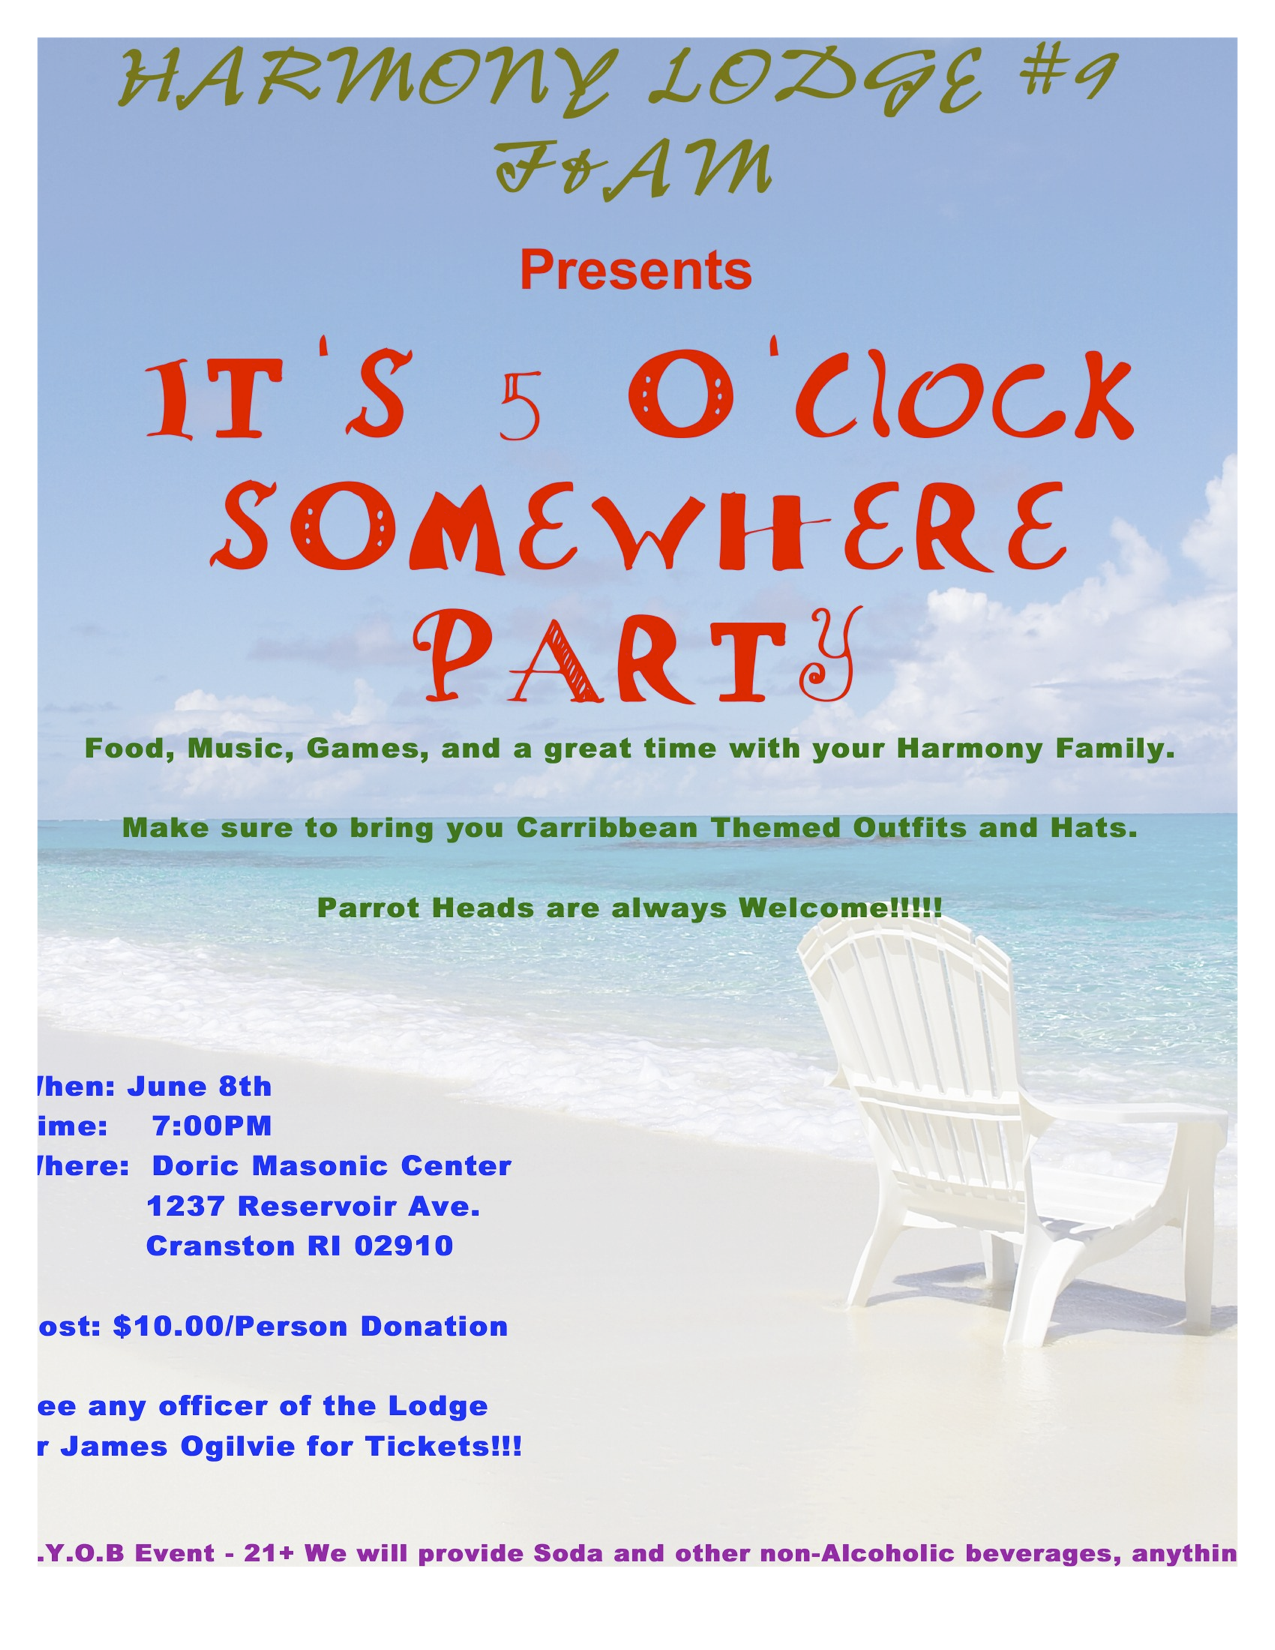 It’s 5 O’Clock Somewhere Party – June 8, 2013 @ 7:00 pm